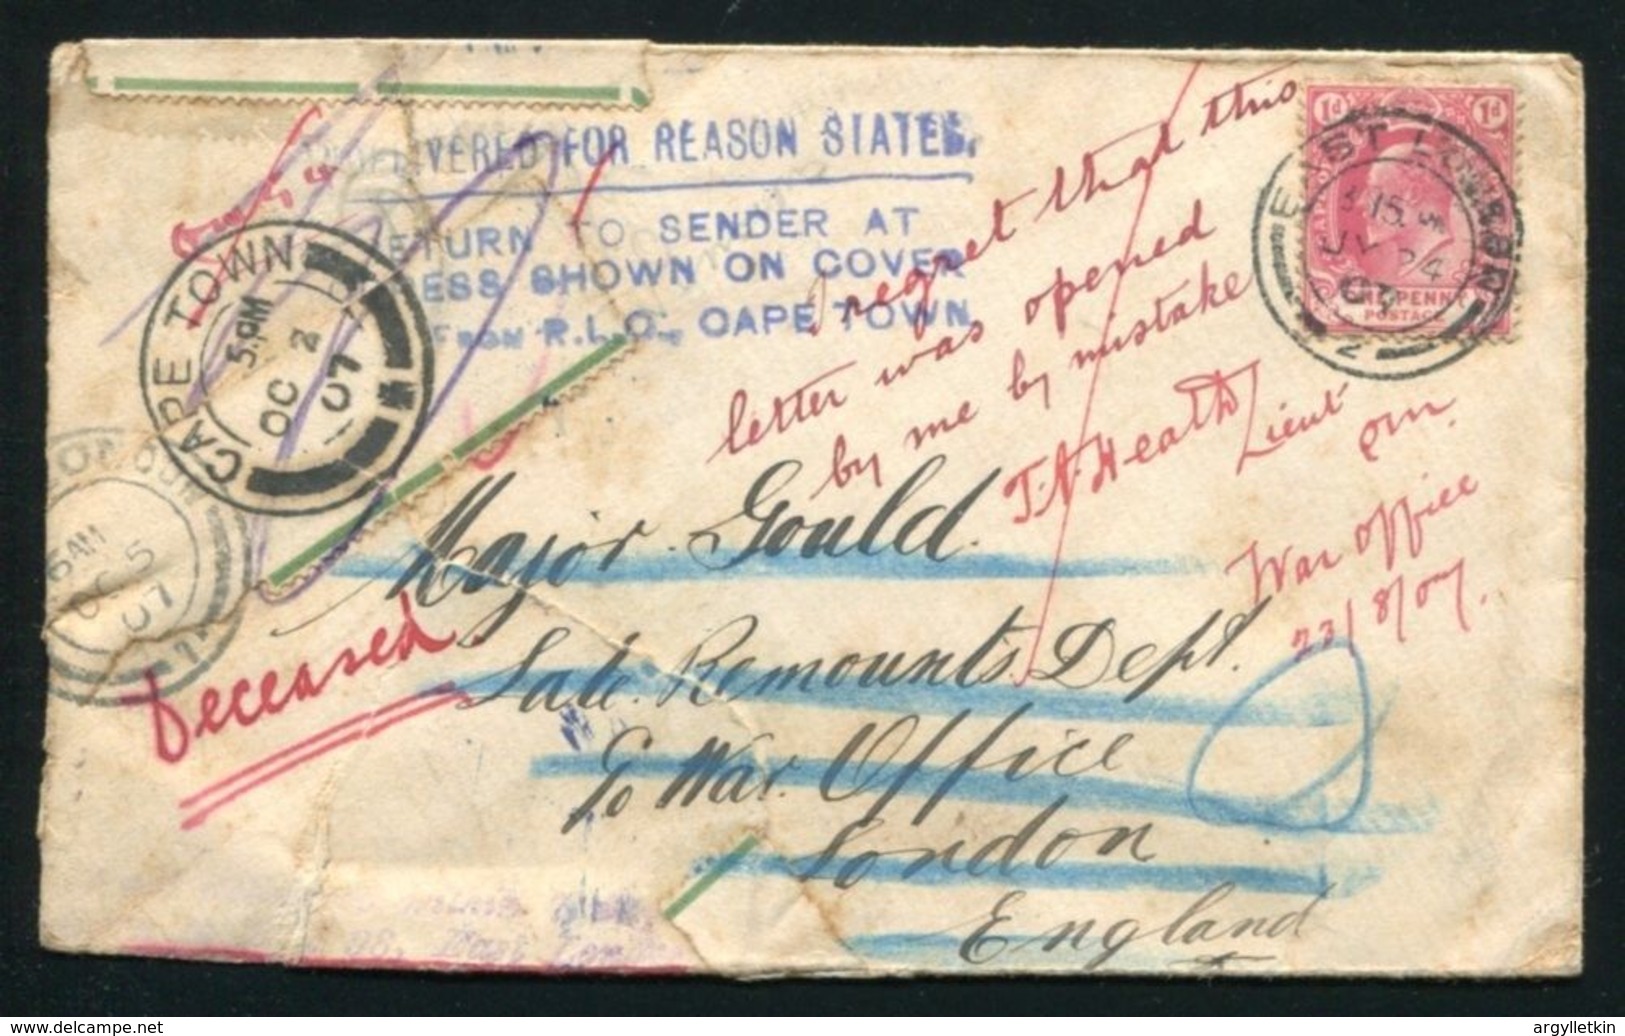 SOUTH AFRICA CAPE 1907 EAST LONDON RETURNED LETTER OFFICE CAPE TOWN AND LONDON - Unclassified